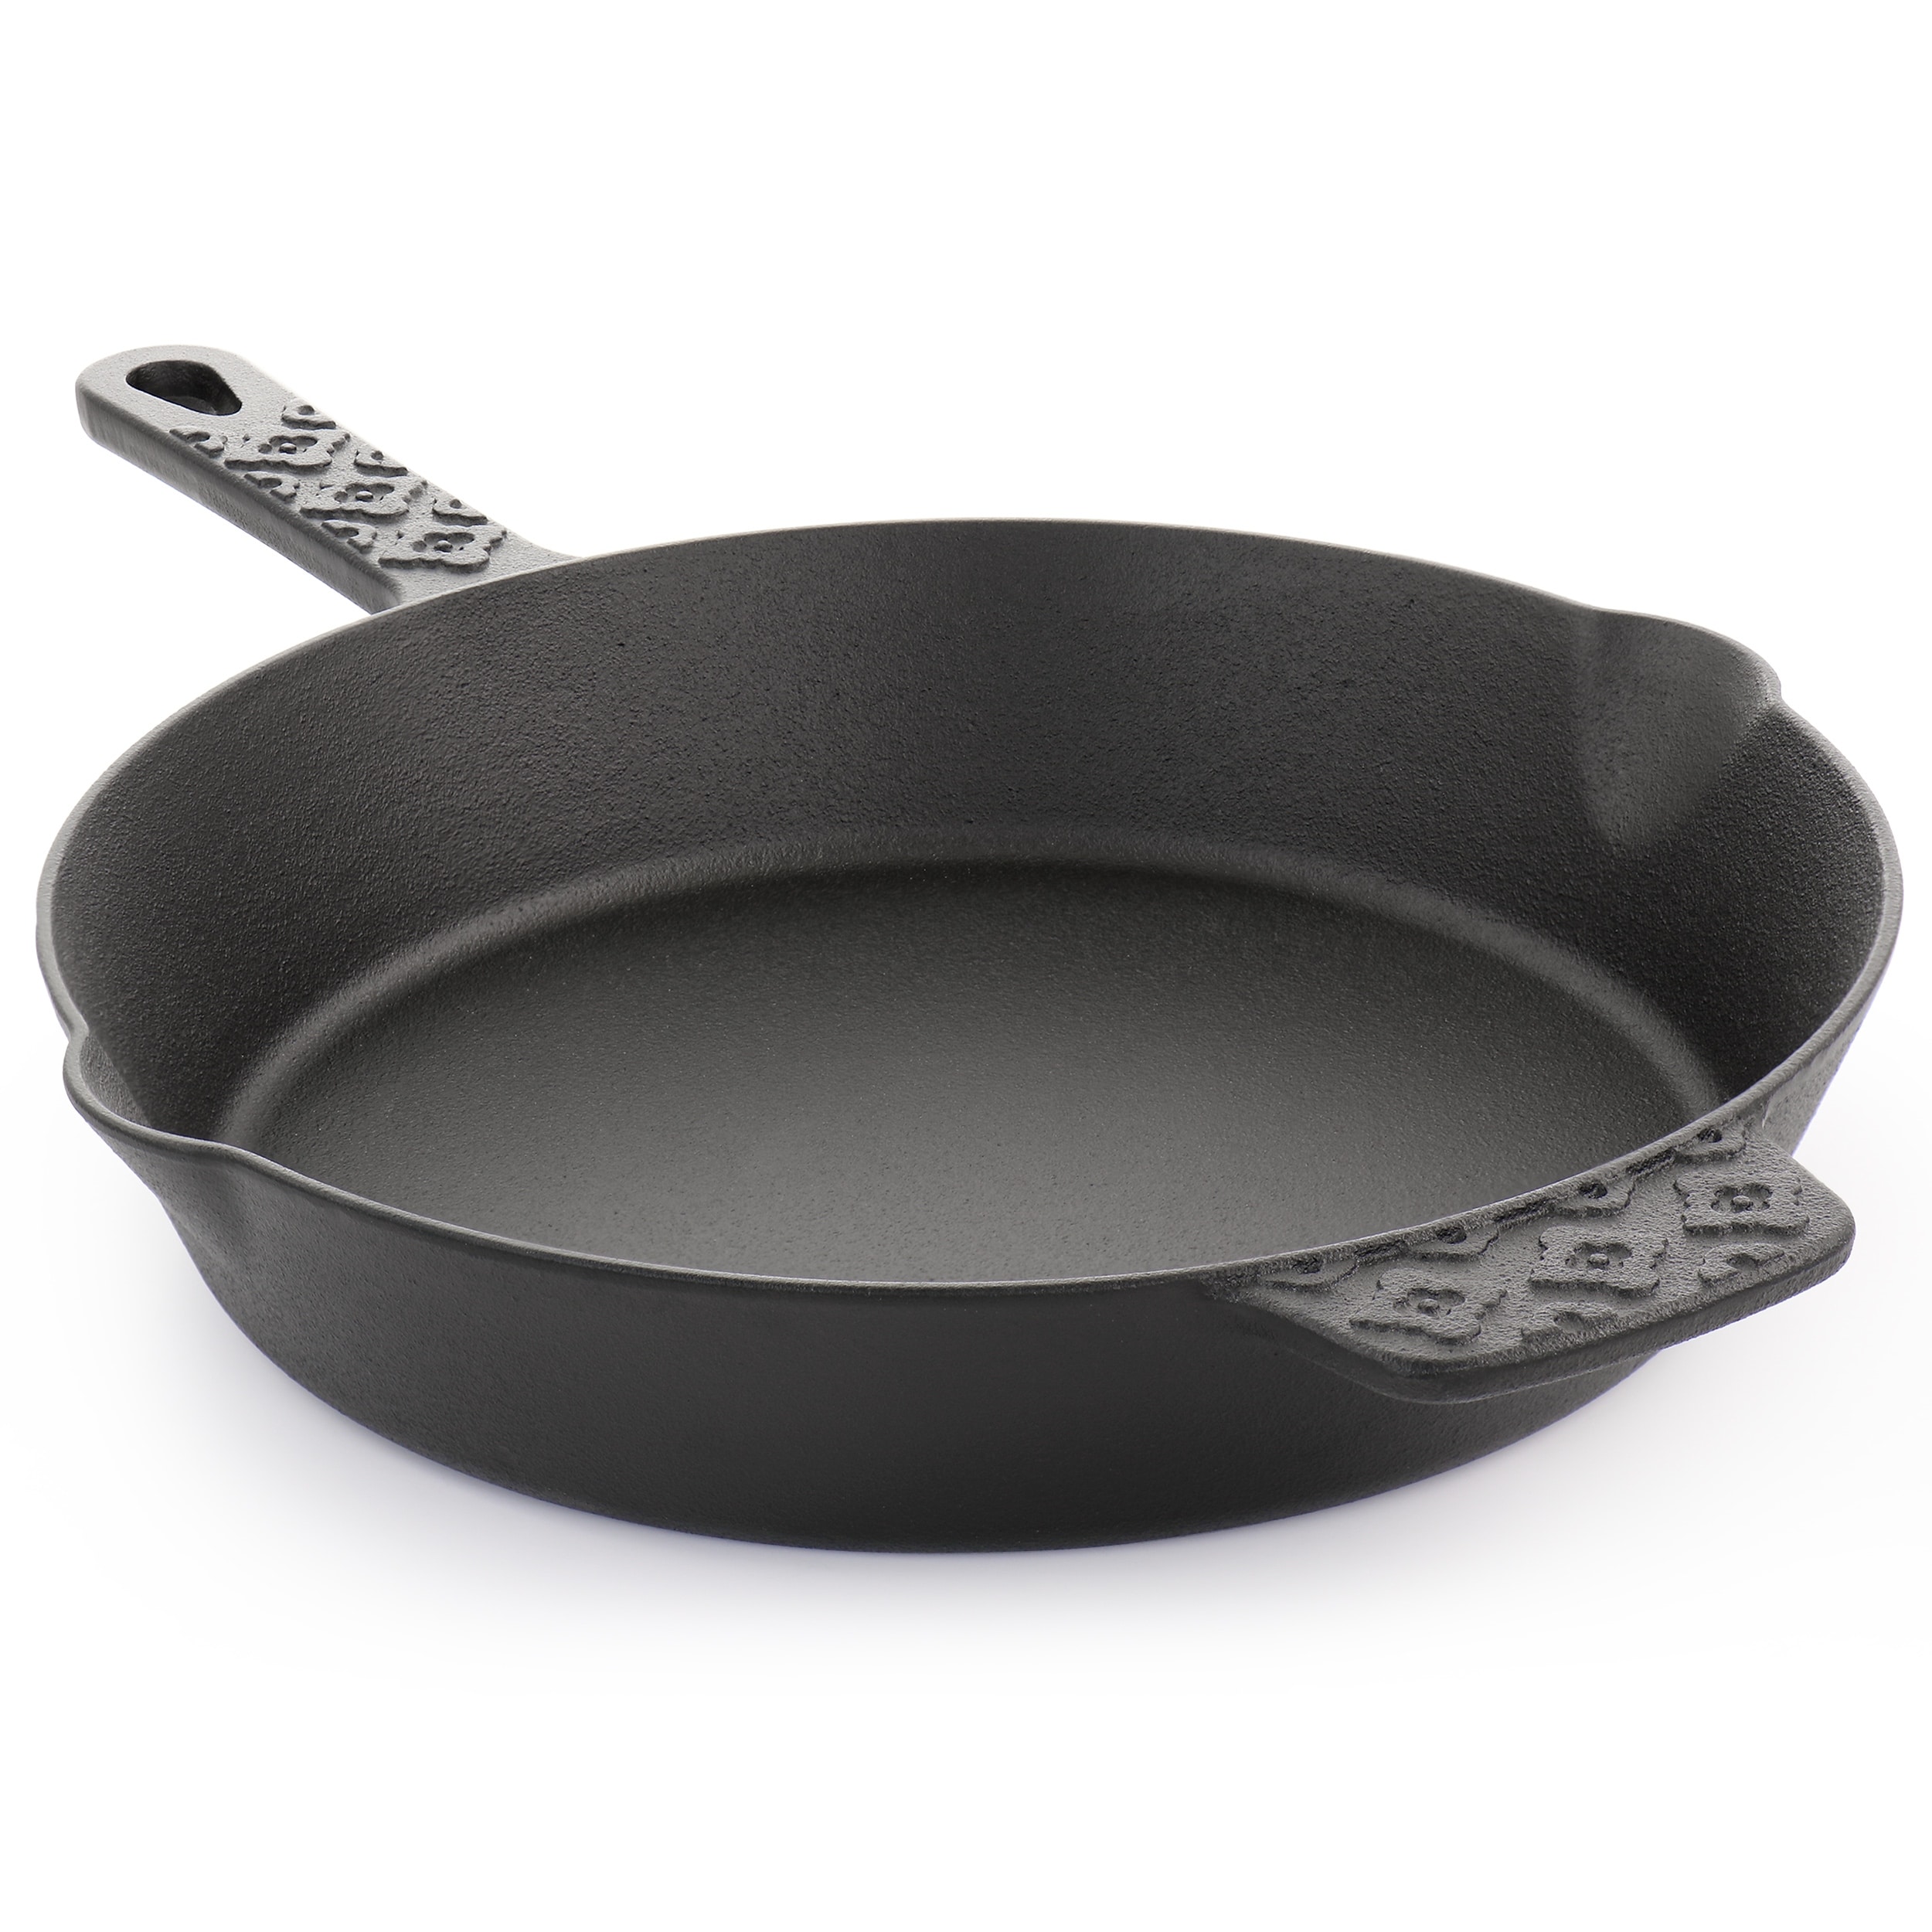 12 Inch Cast Iron Skillet with Pouring Spouts - Bed Bath & Beyond - 37451544